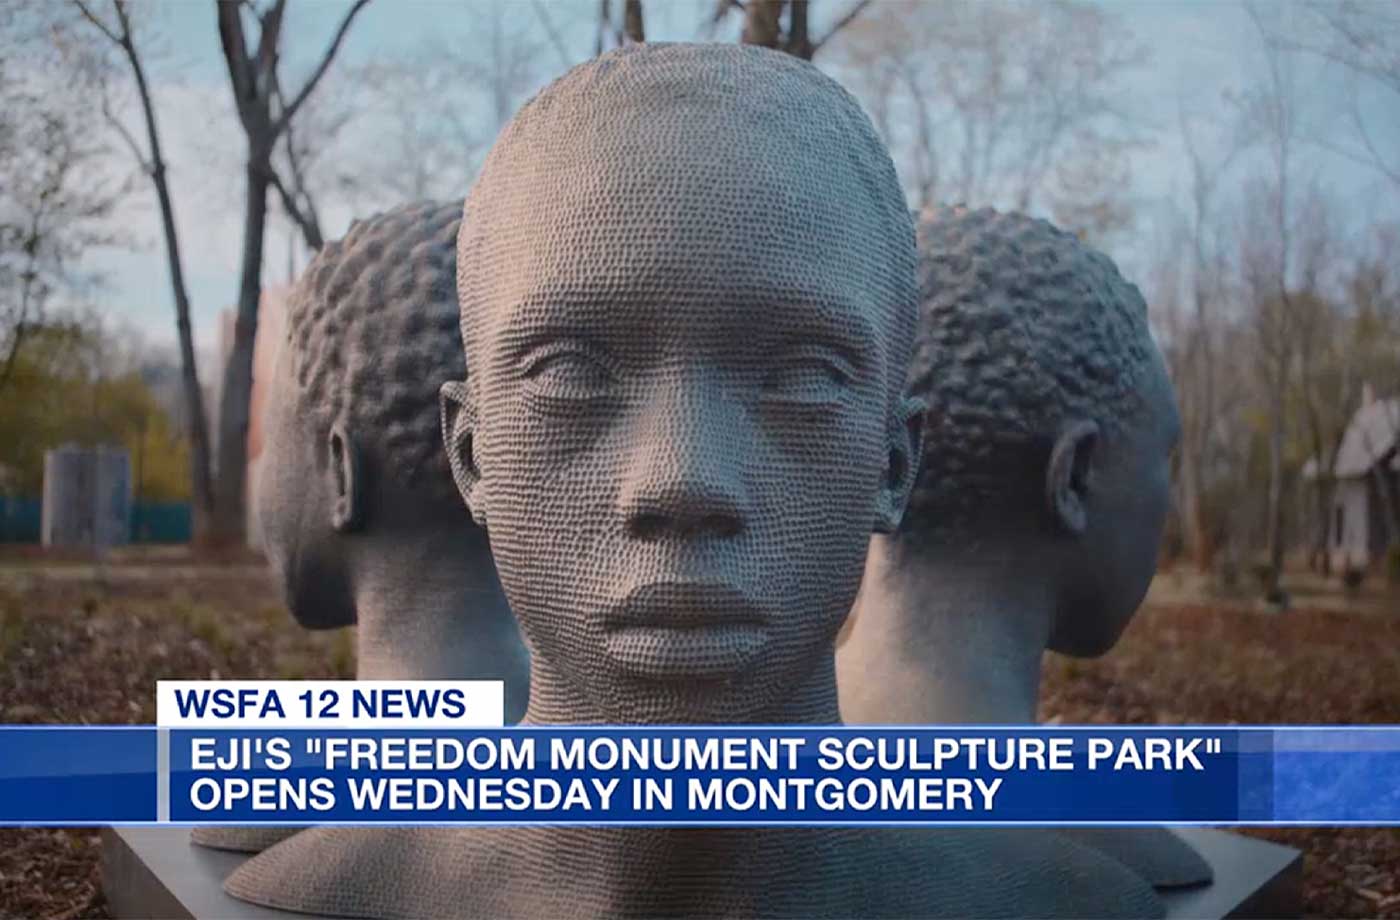 EJI’s New Freedom Monument Sculpture Park Opens Wednesday in Montgomery